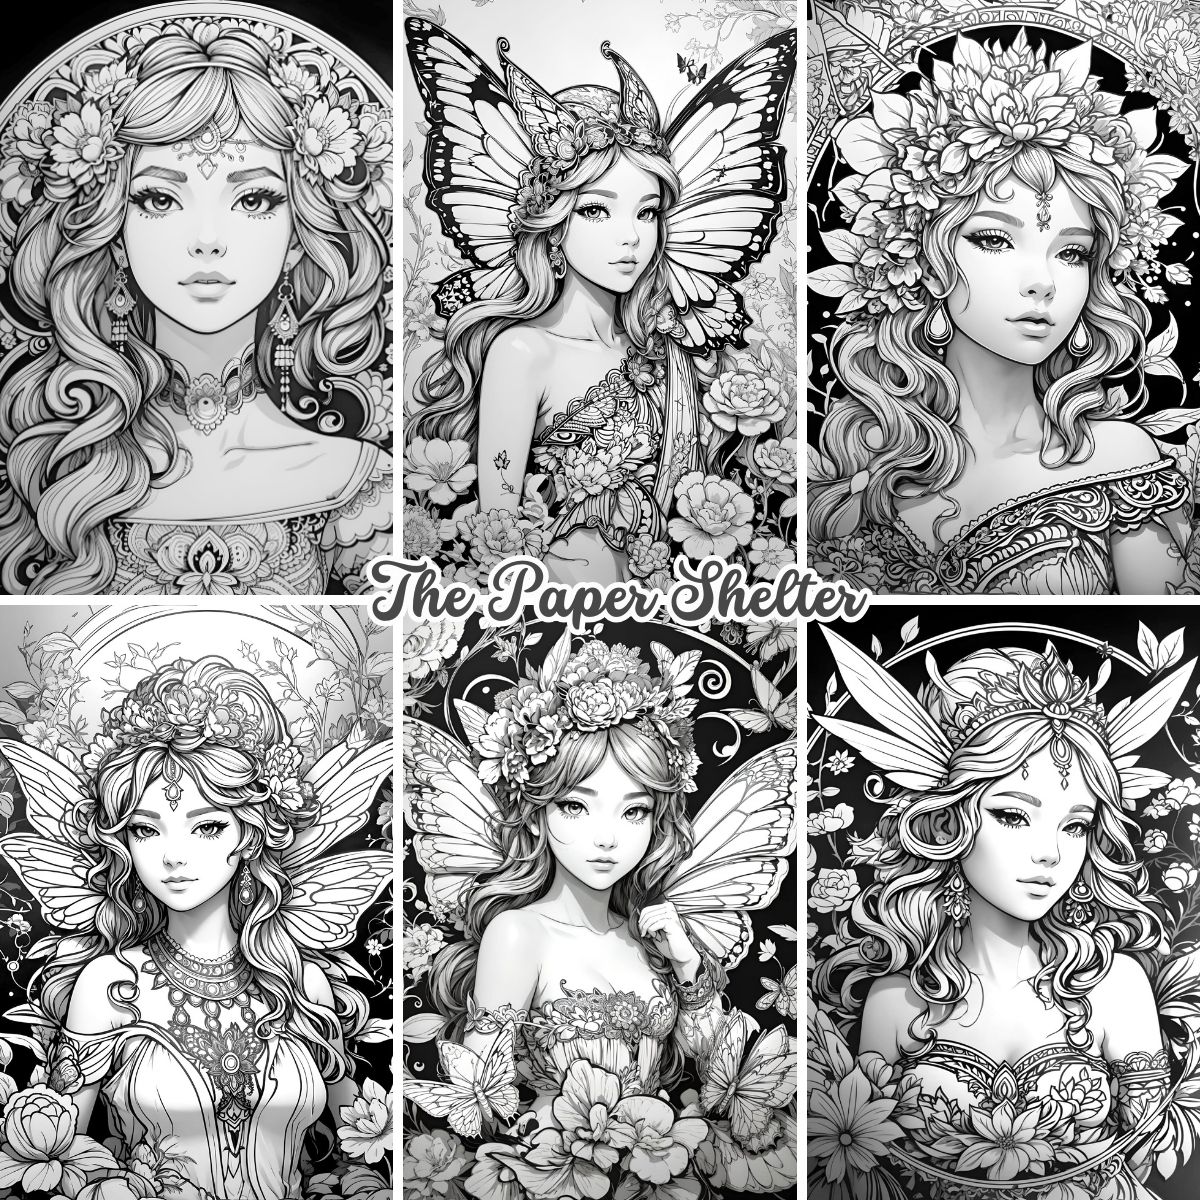 Enchanted Forest Ladies - Digital Coloring Book - Click Image to Close